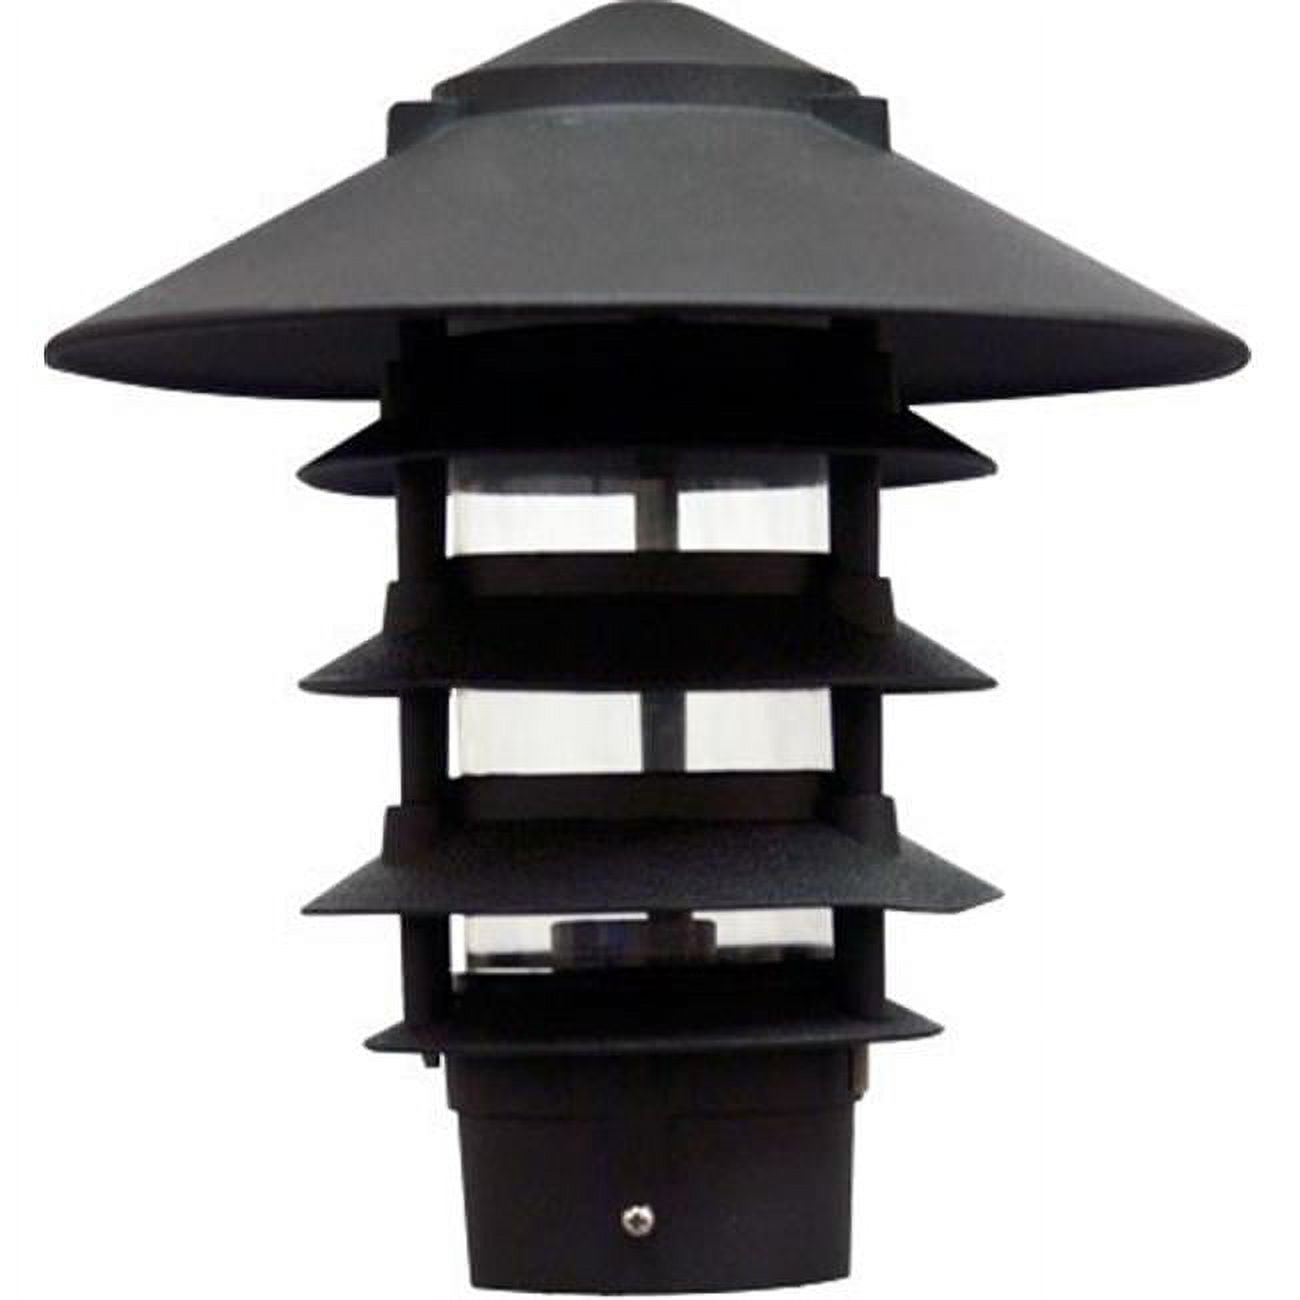 Pagoda Fixture 5 Tier 10 In. Top 3 In. Base 6w Filament Led - 120v, Black